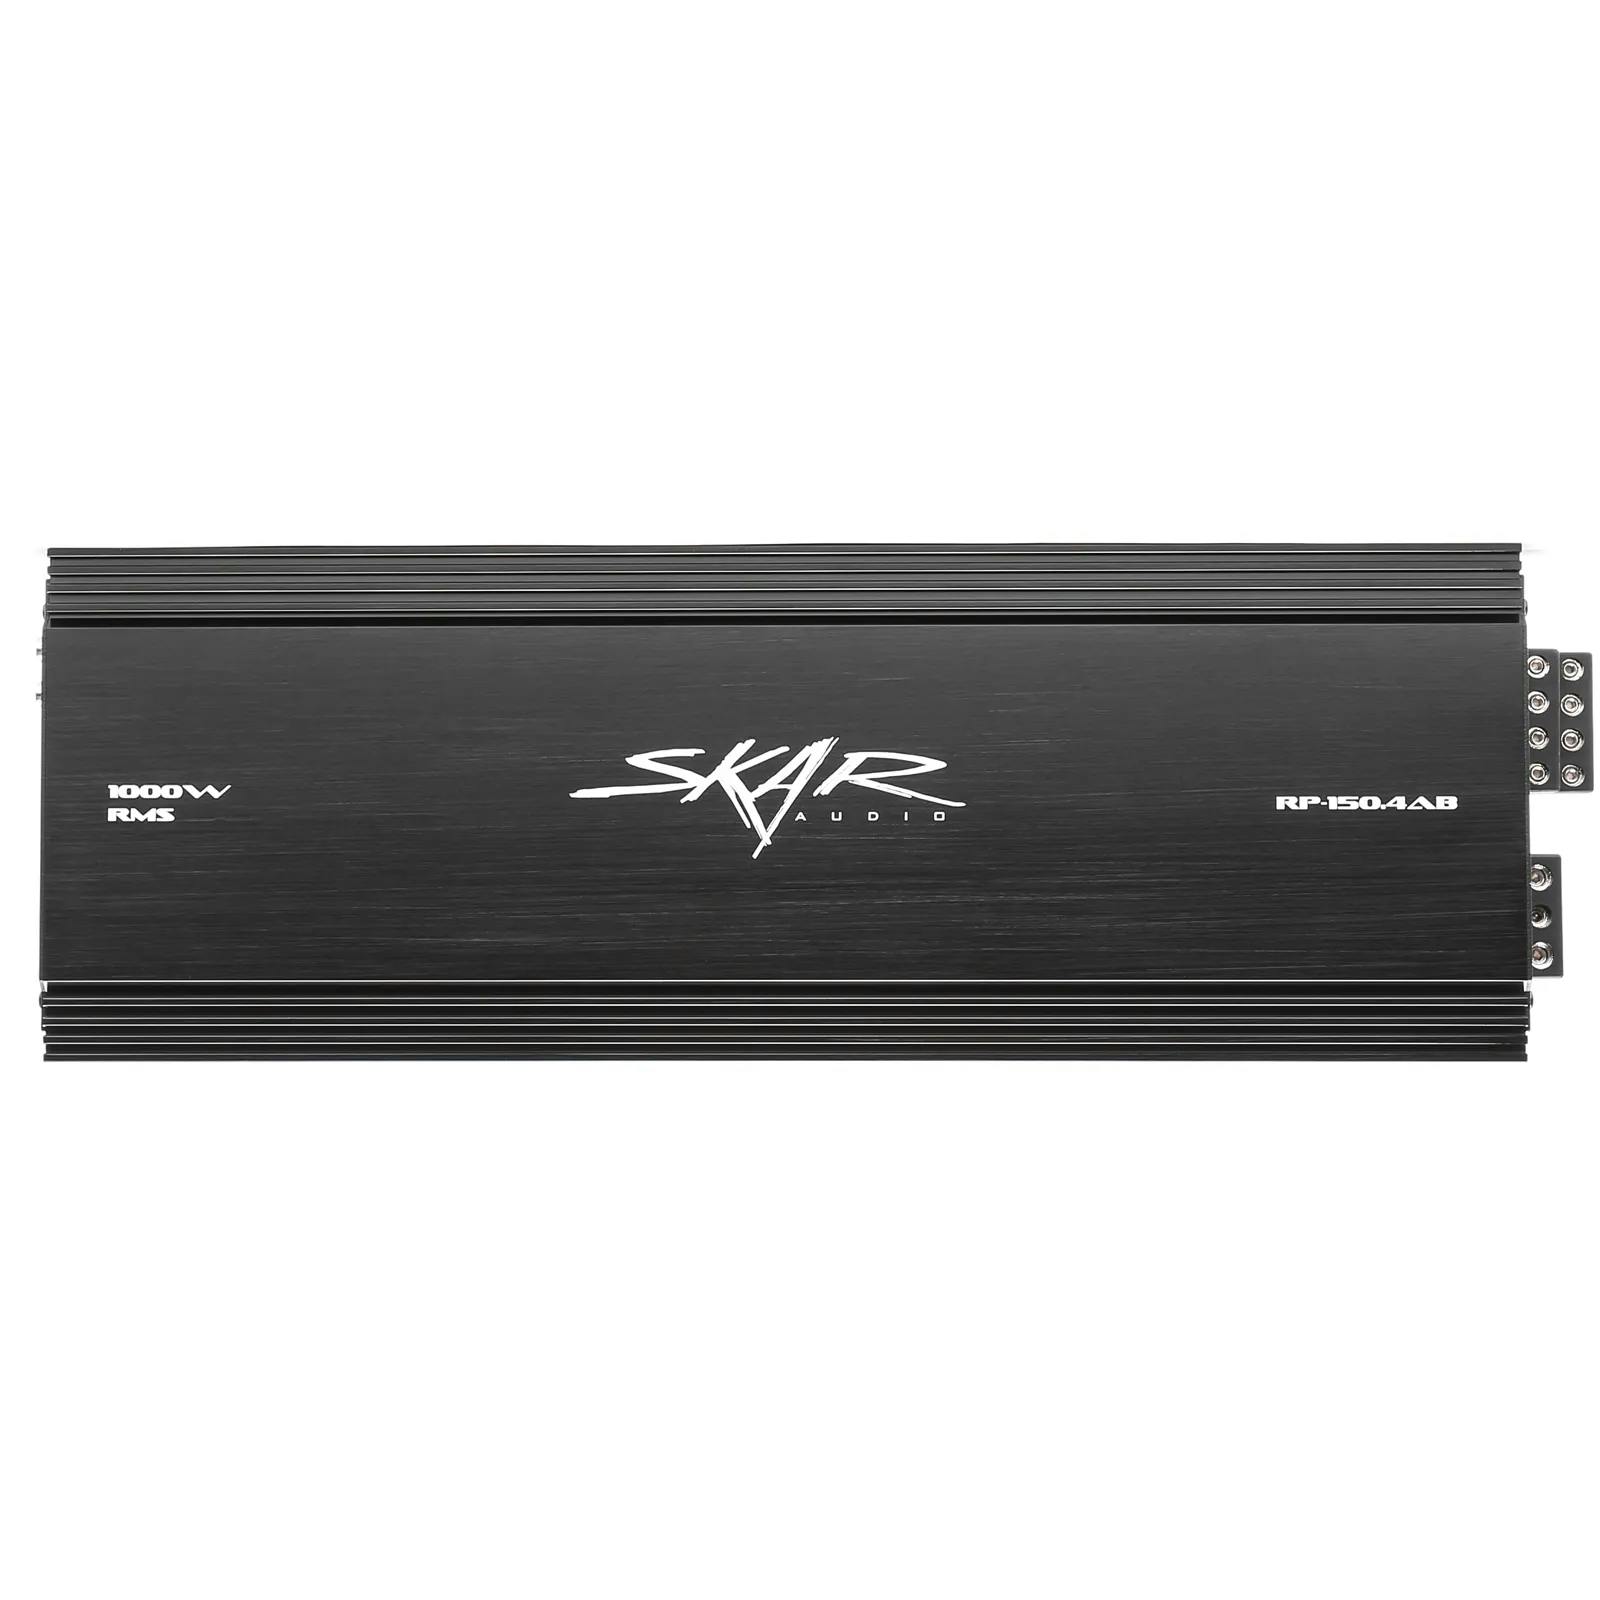 Featured Product Photo for RP-150.4AB | 1,000 Watt 4-Channel Car Amplifier